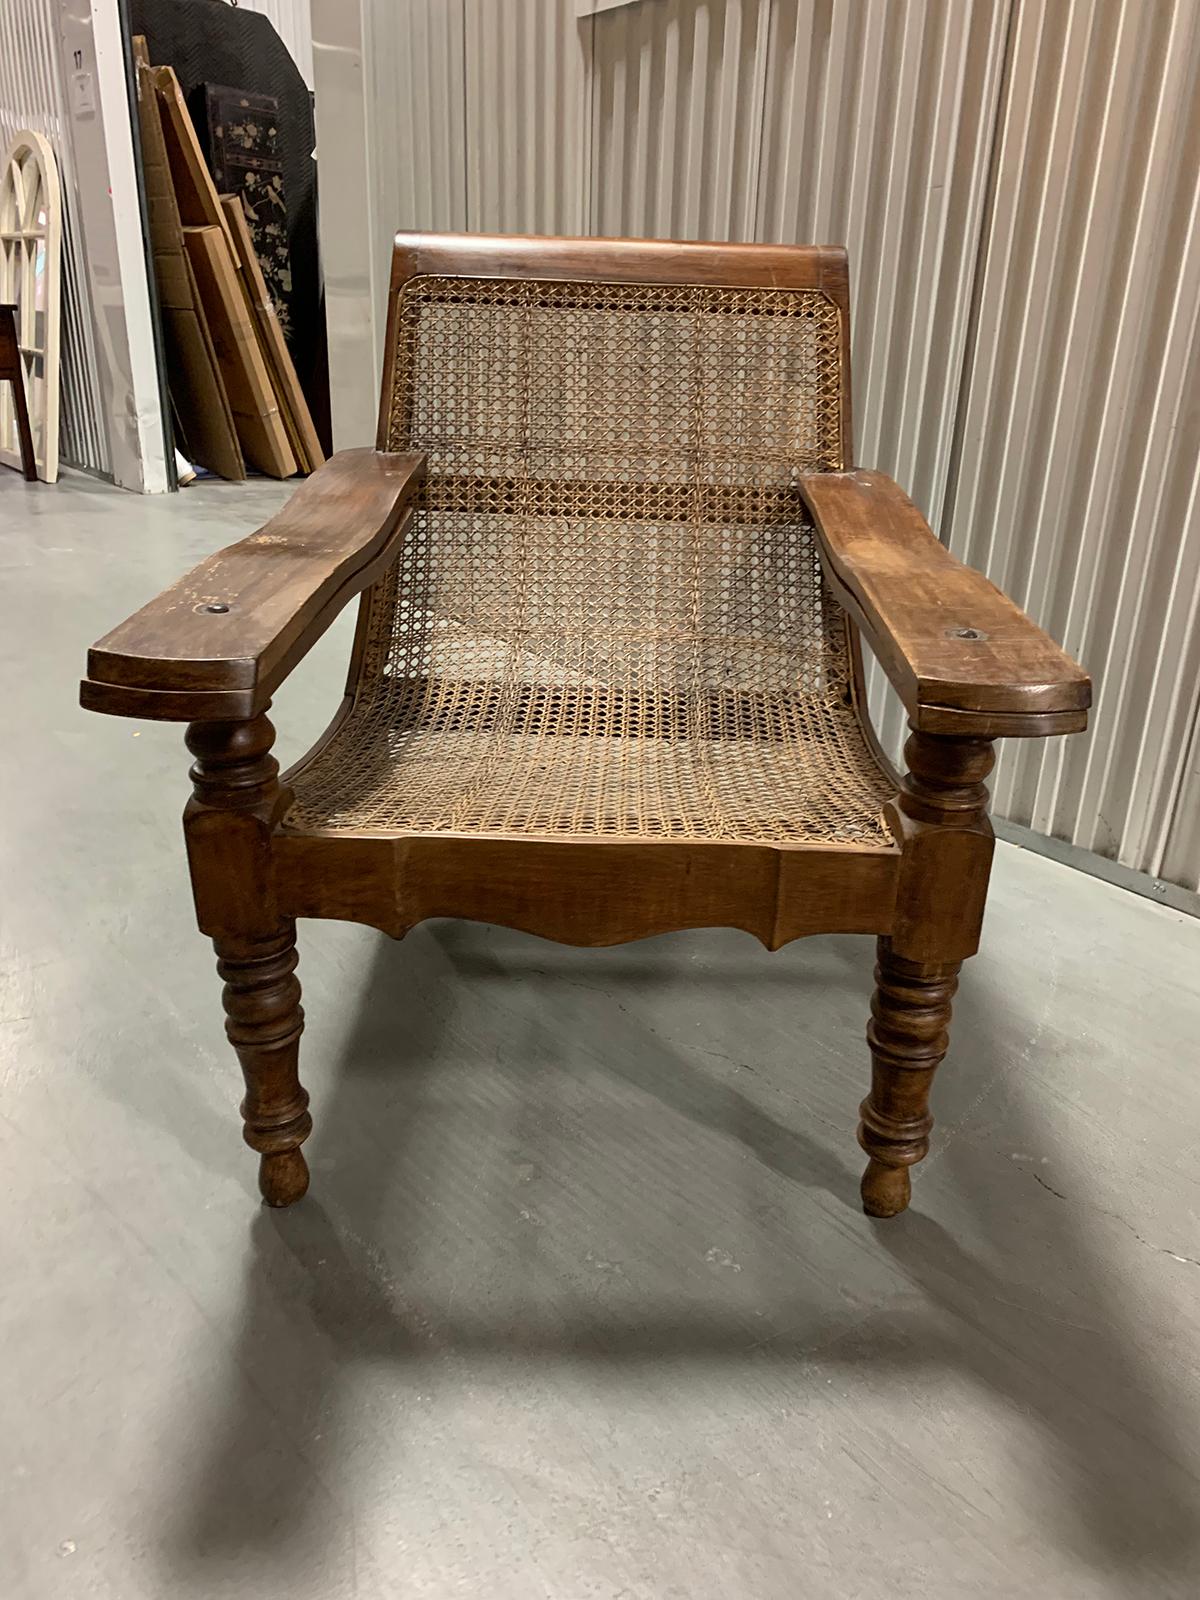 19th Century 19th-Early 20th Century Anglo-Caribbean Caned Planters Chair with Leg Stretchers